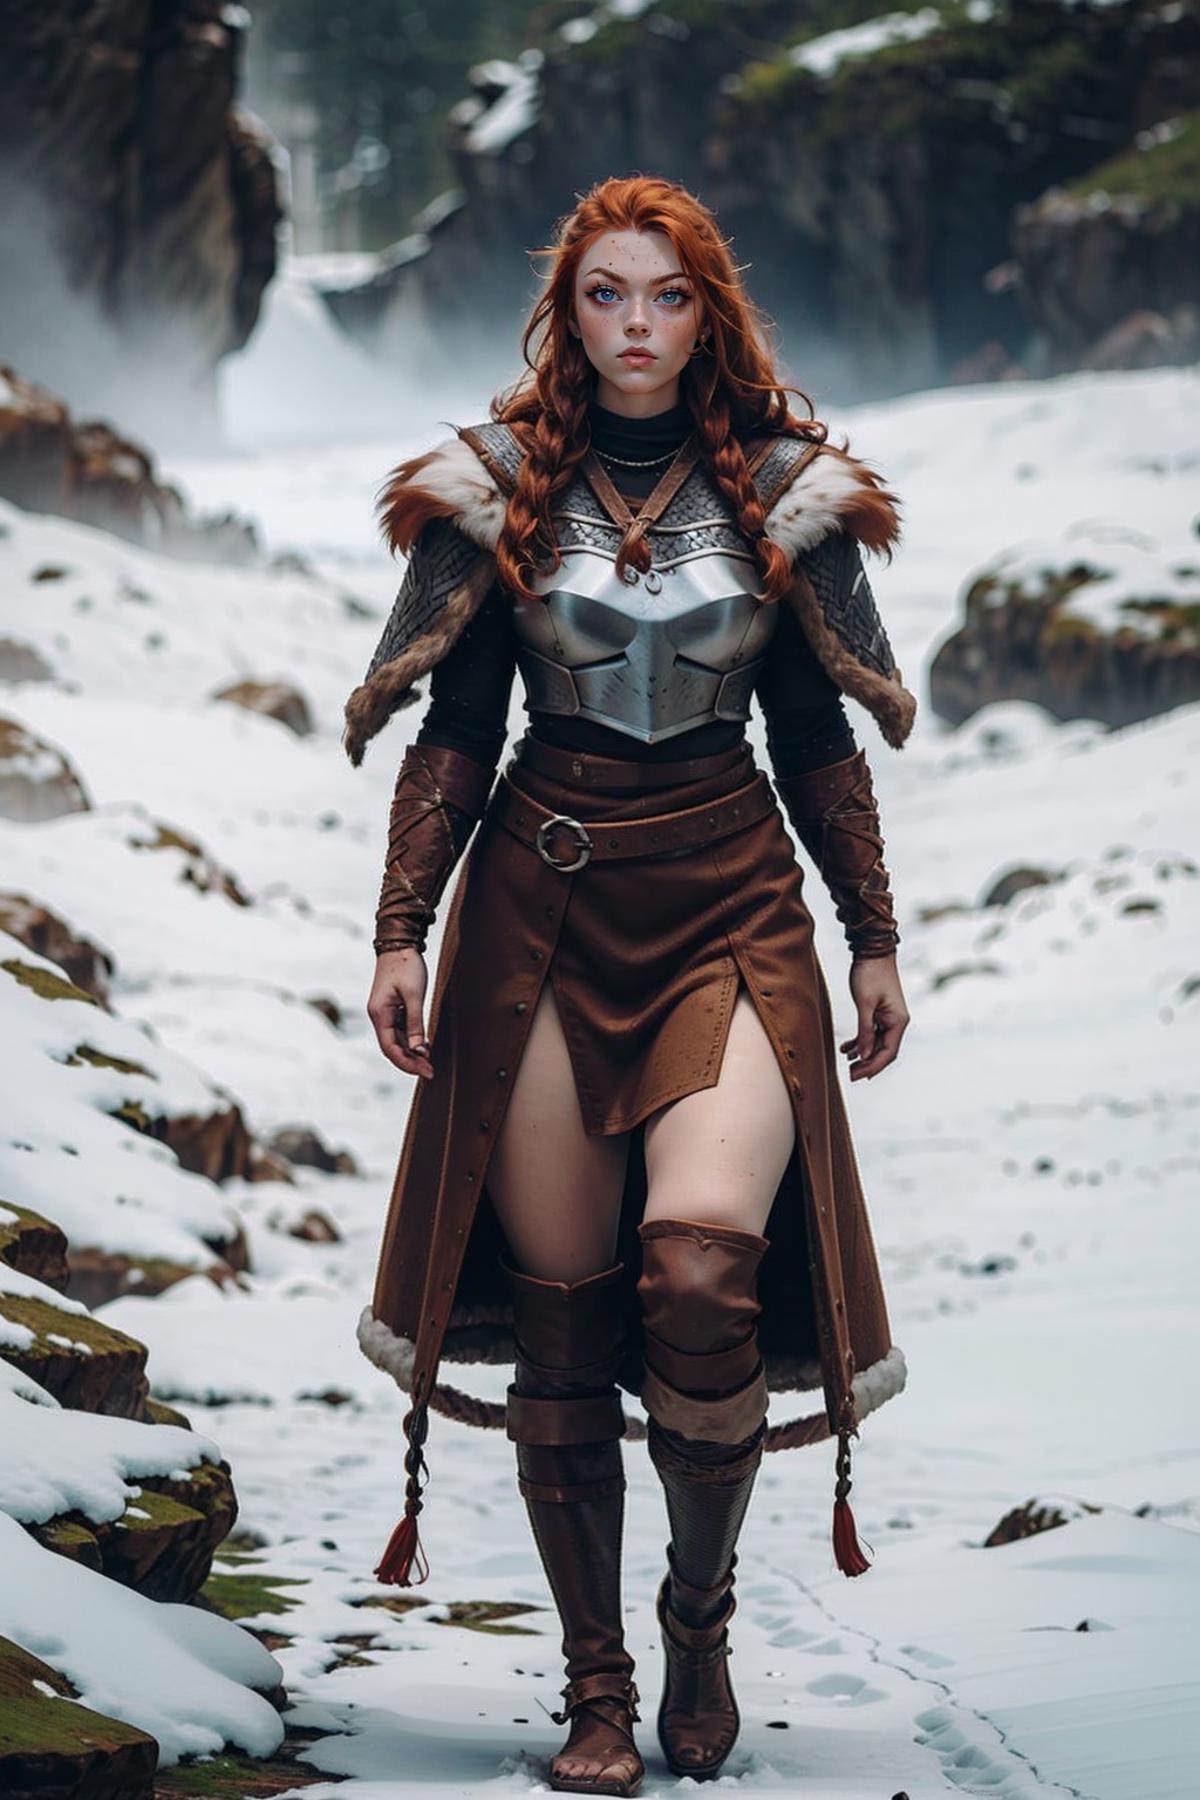 A woman wearing a warrior costume walking through the snow.